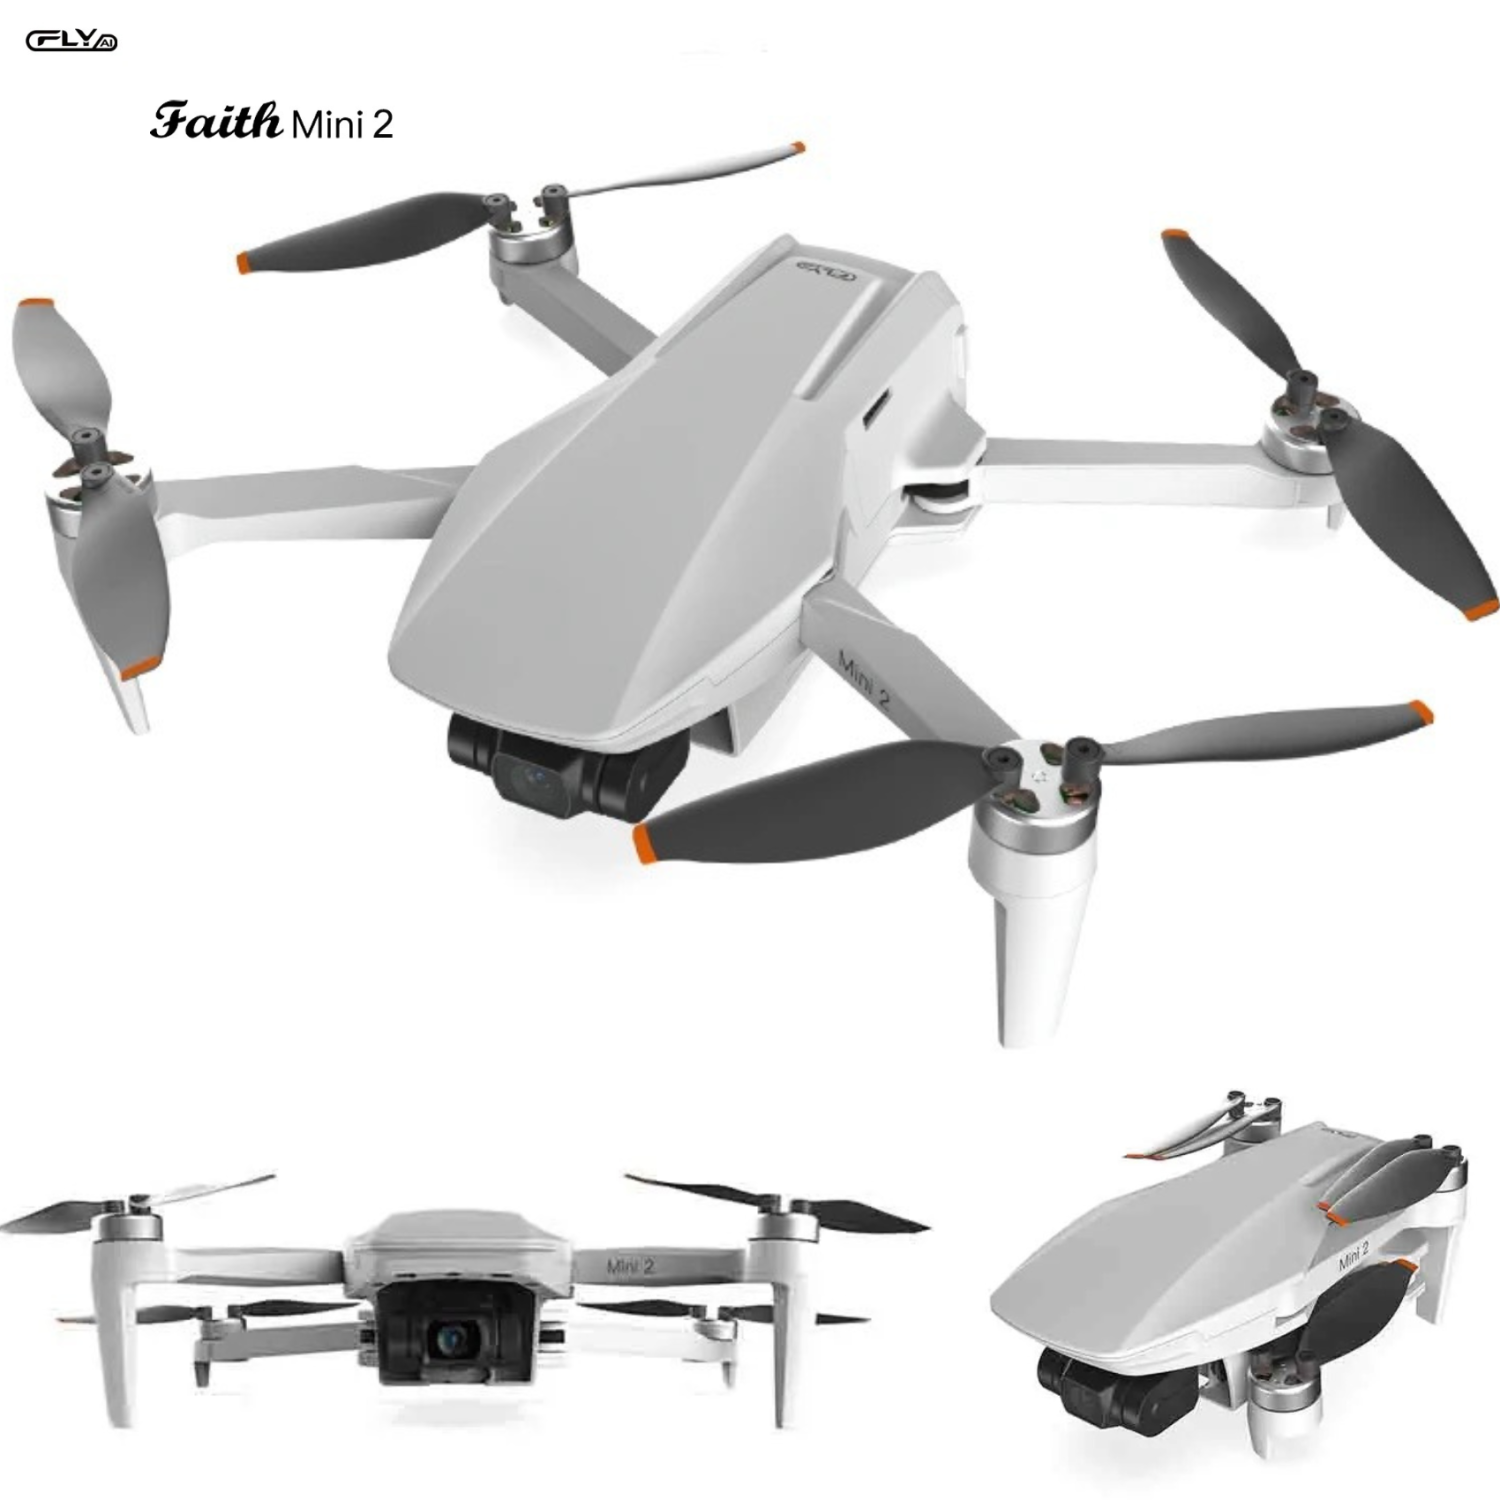 TUTT C-FLY Faith Mini 2 (Upgraded) Pro GPS 5G 5KM WIFI FPV with 4K 30fps 20MP Camera 3-Axis Brushless Gimbal 32mins Flight Time Under 250 gr RC Drone Quadcopter RTF SanDisk 128GB